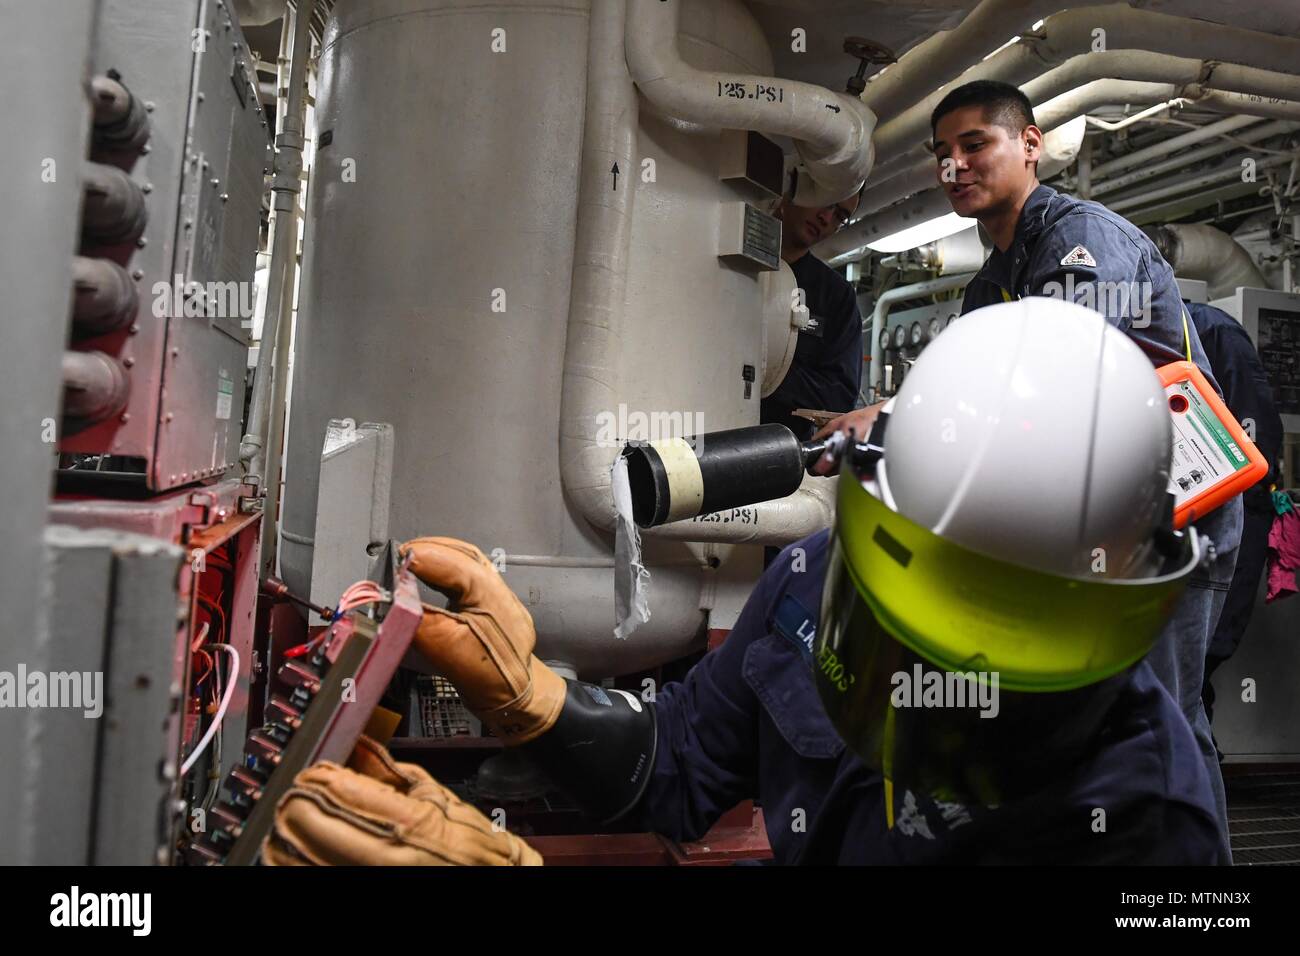 170111-N-JI086-063 - MEDITERRANEAN SEA (Jan. 11, 2017) Electrician's Mate 1st Class Fernando Landeros, from Dallas, left, and Gas Turbine Systems Technician (Mechanical) 3rd Class Enrique Gonzalez, from San Bernardino, Calif., participate in an engineering training team evolution aboard the guided missile destroyer USS Porter (DDG 78), Jan. 11, 2017. Porter, forward-deployed to Rota, Spain, is conducting naval operations in the U.S. 6th Fleet area of operations in support of U.S. national security interests in Europe. (U.S. Navy photo by Mass Communication Specialist 3rd Class Ford Williams/Re Stock Photo